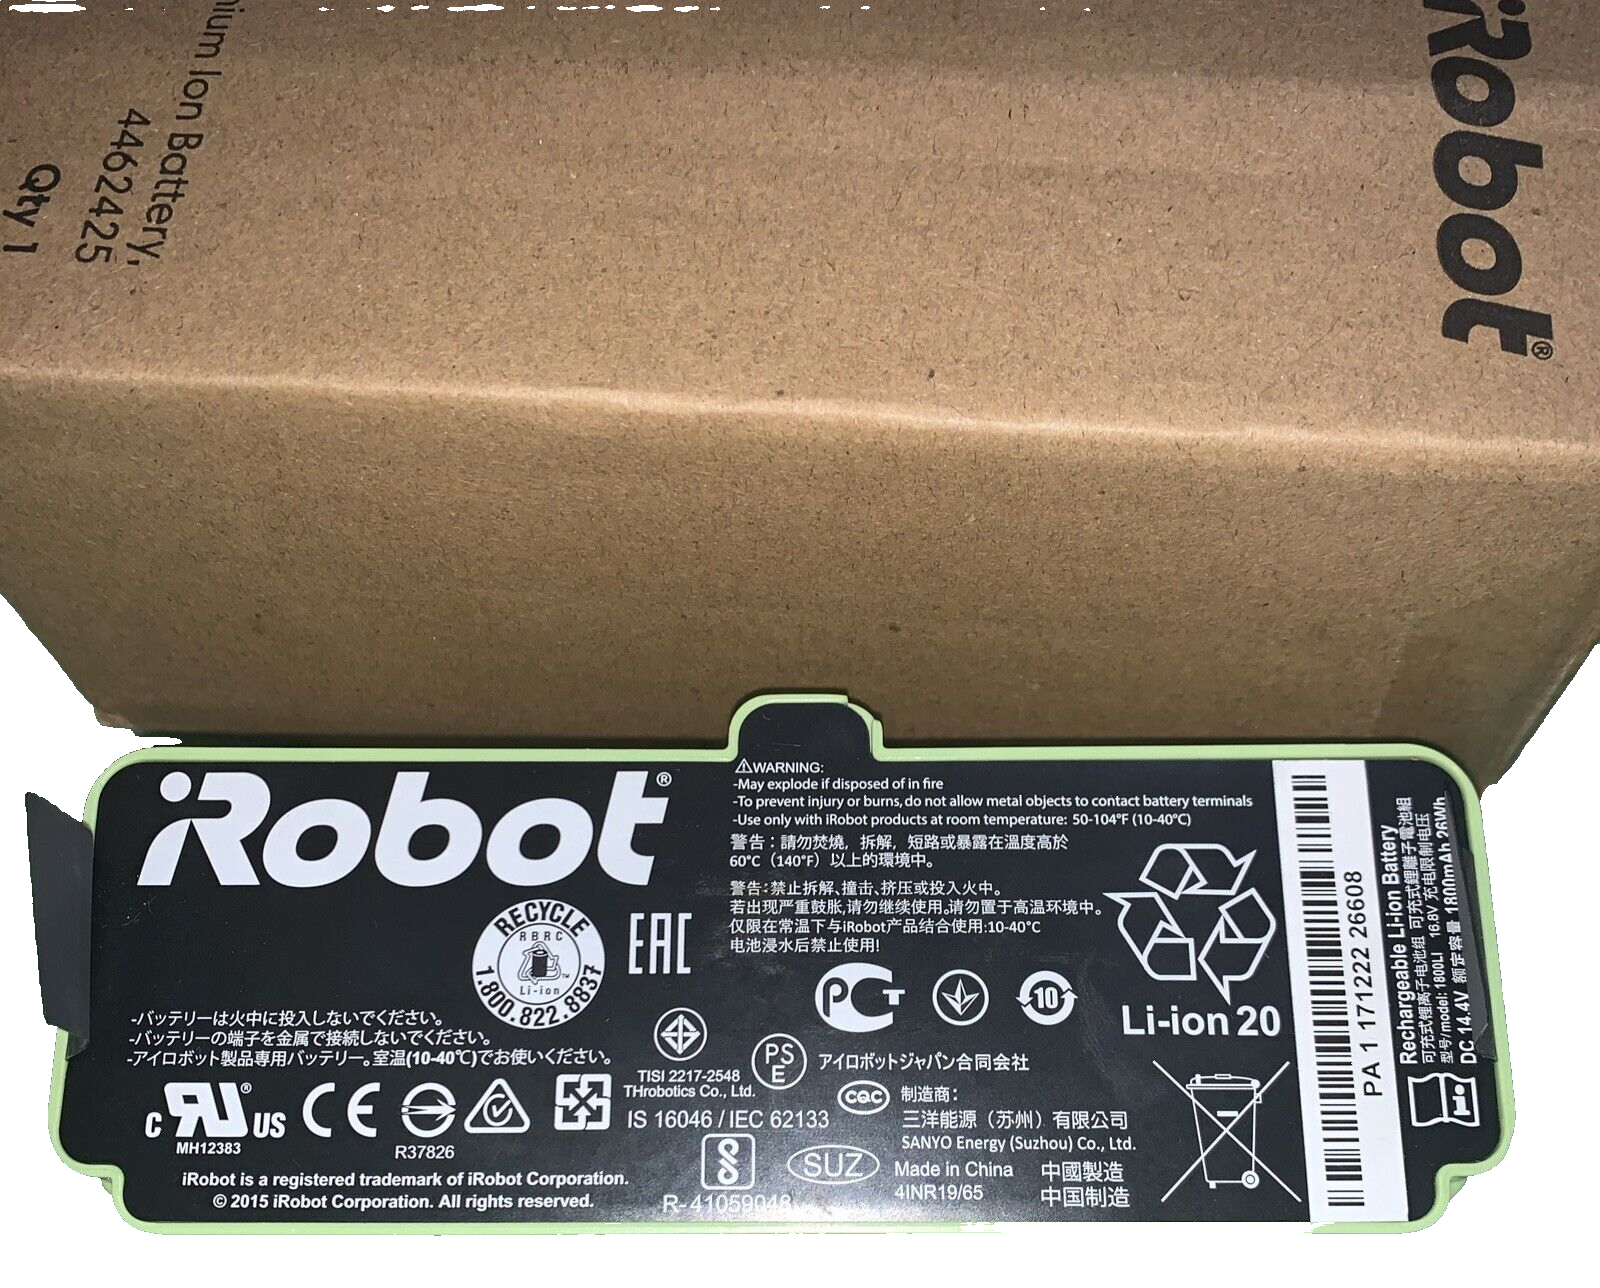 Primary image for iRobot 4462425 Original Lithium Ion Battery for Roomba series 900 - Brand New